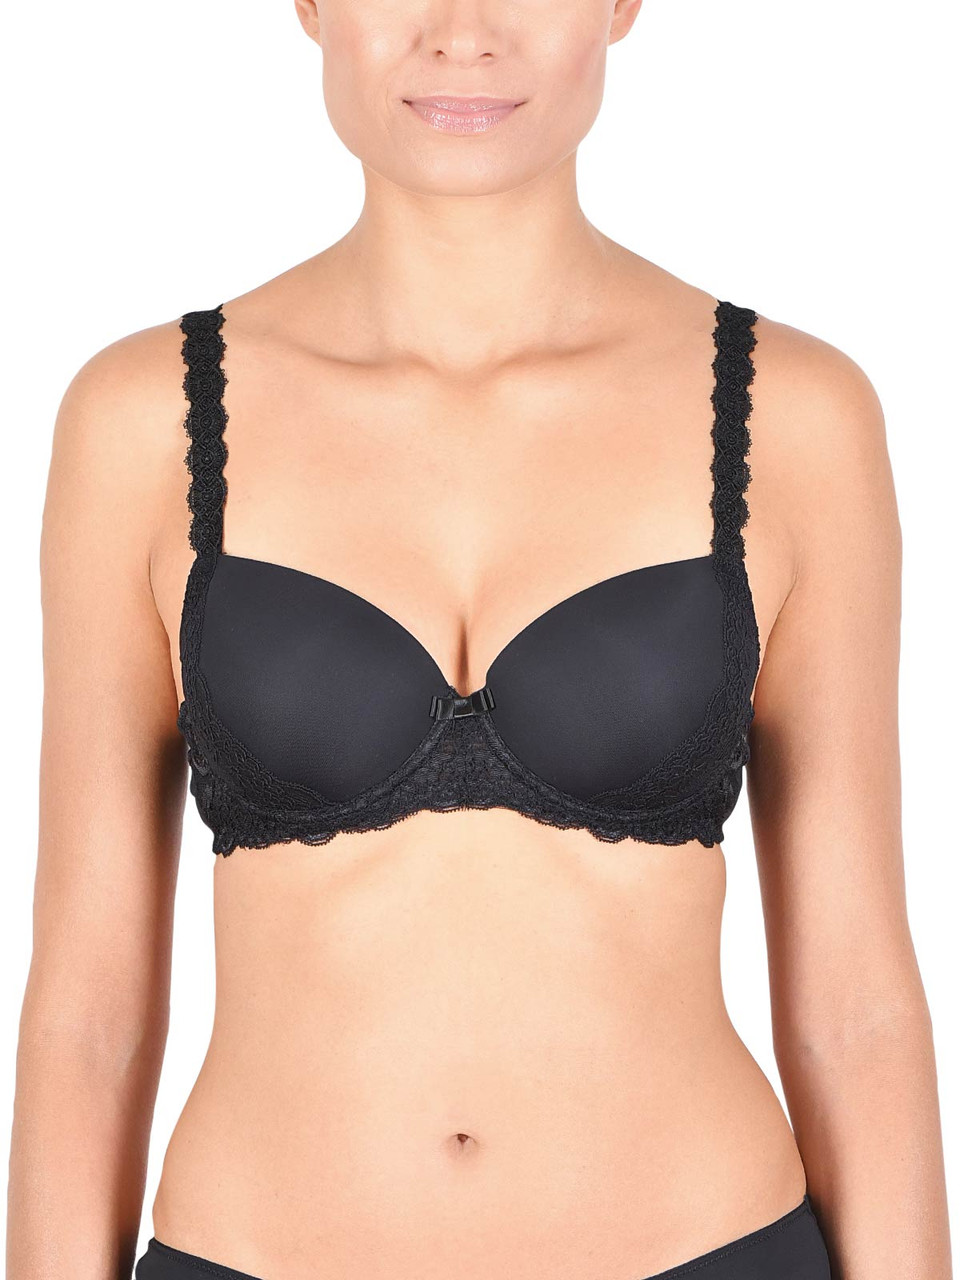 Padded Underwire Bra with Lace Straps Naturana 7457